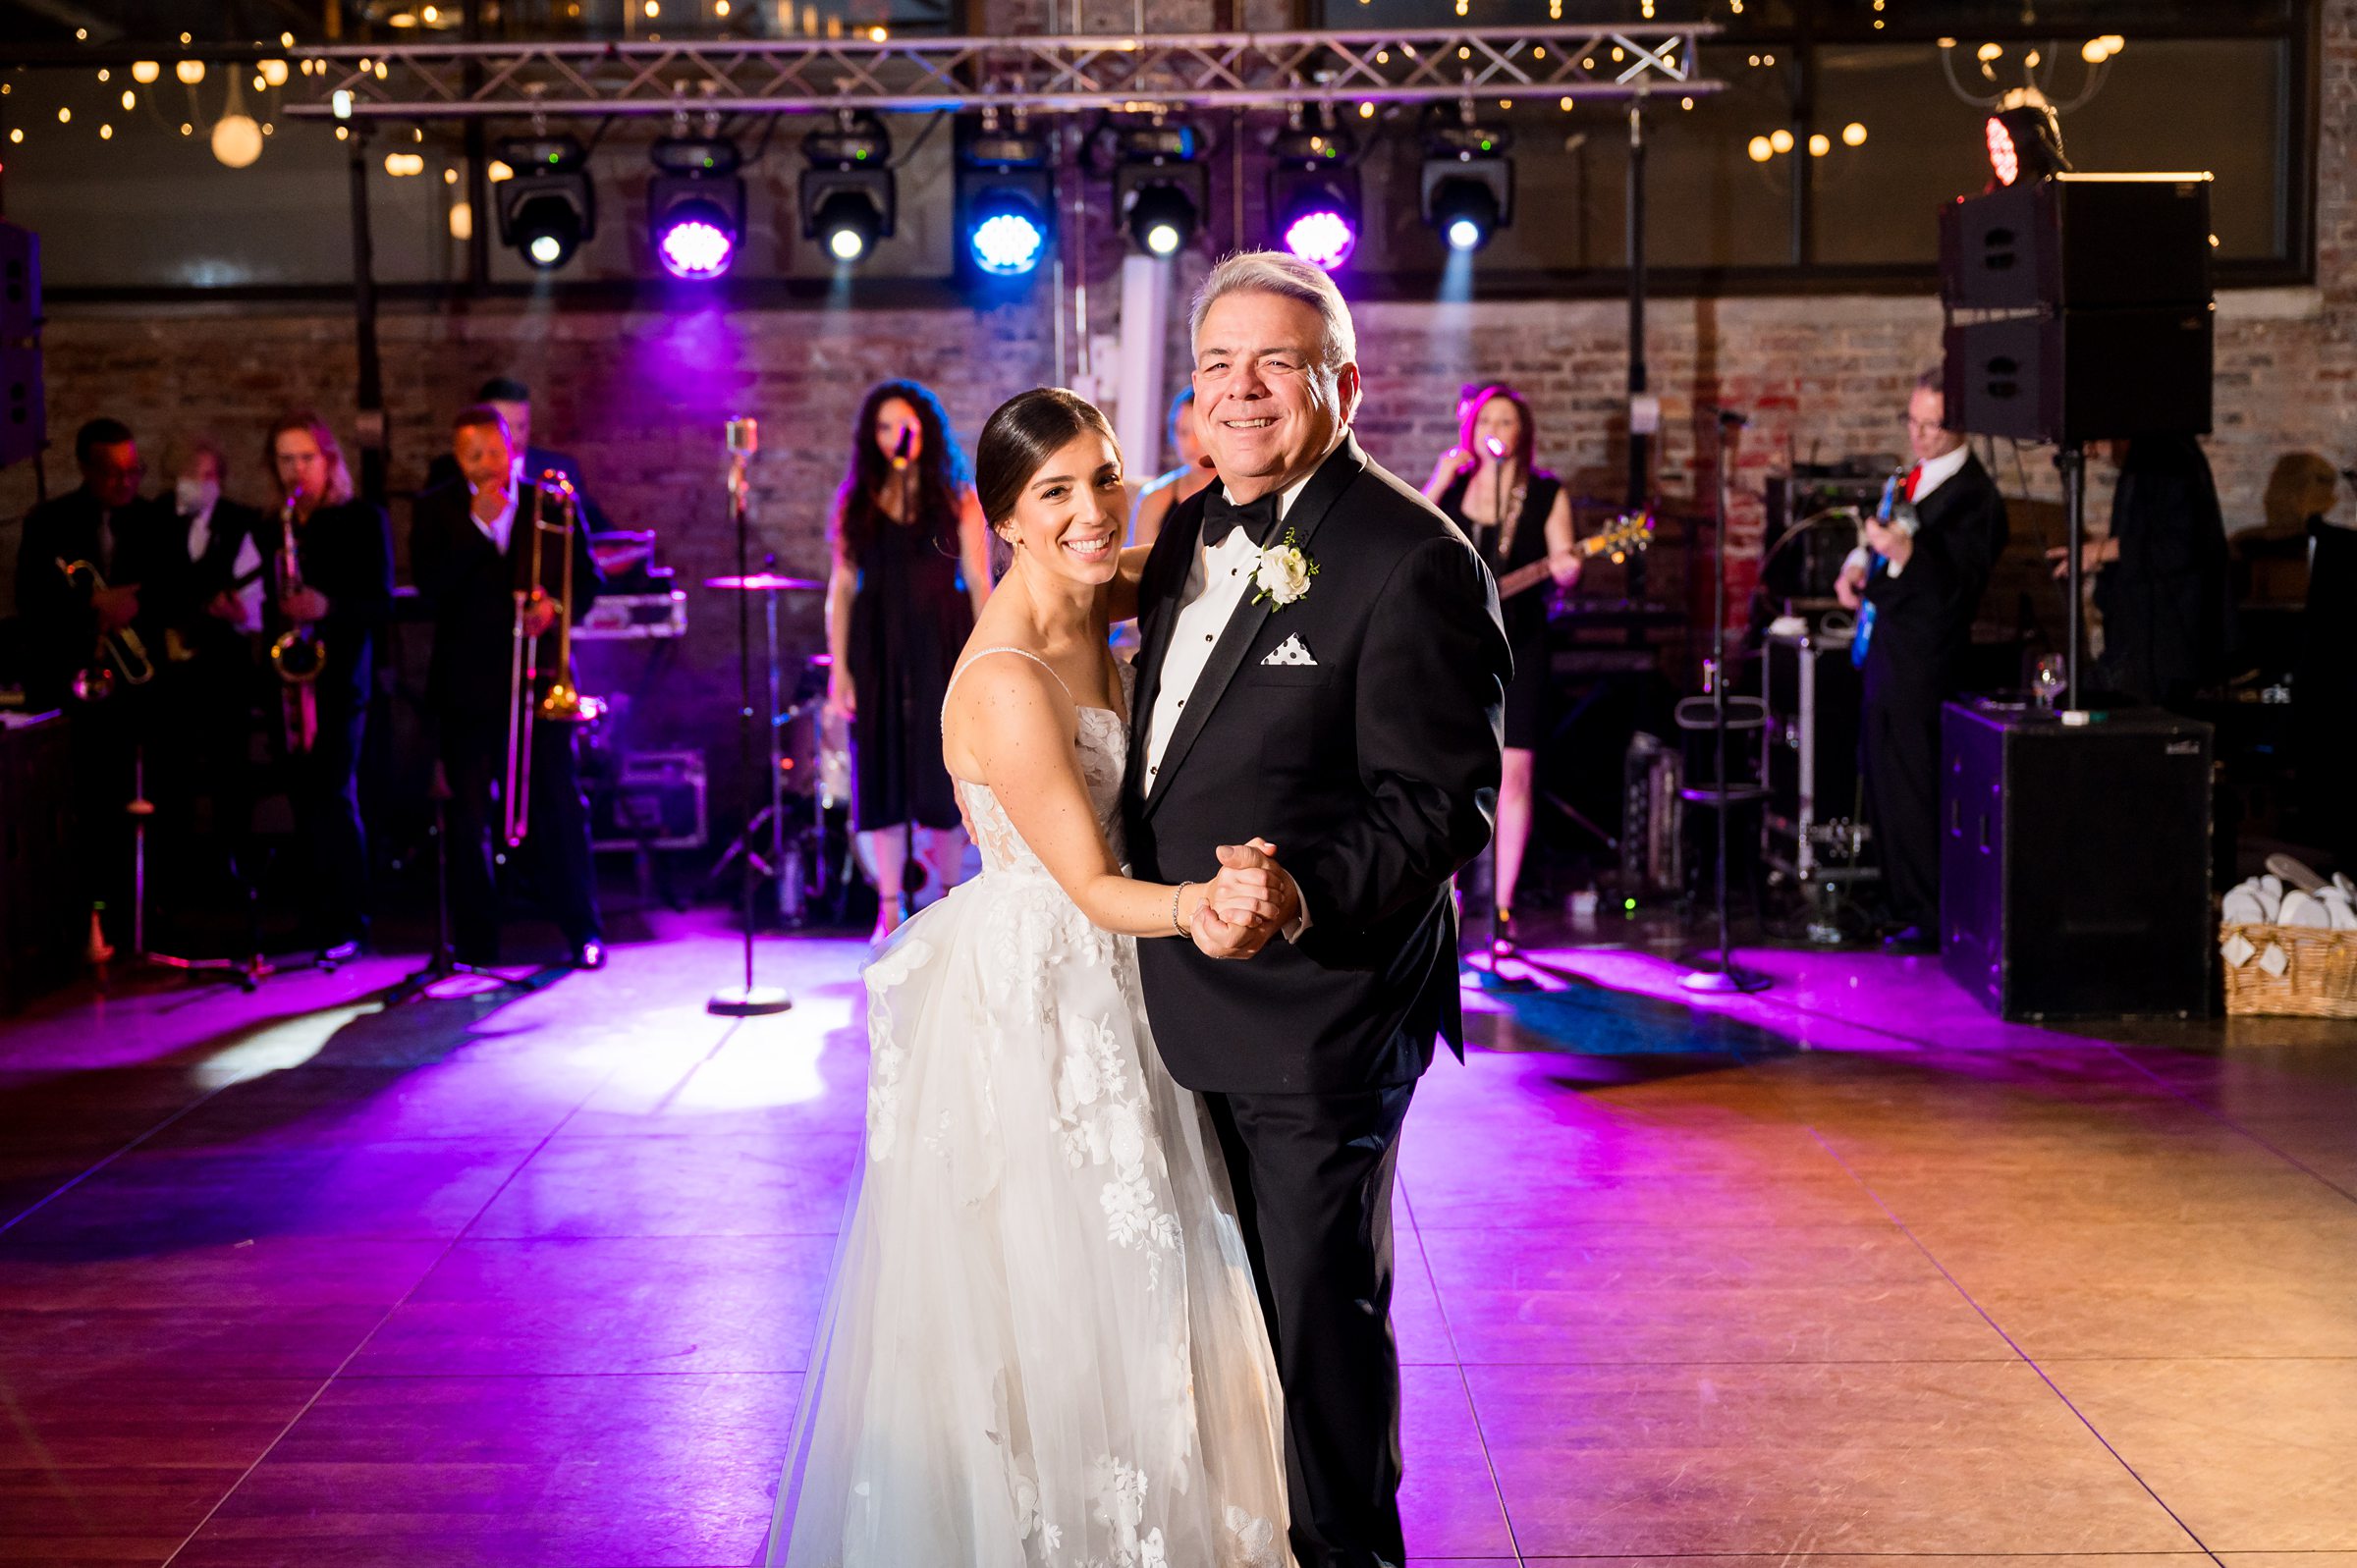 The bride and groom share their first dance at a Lilah Events wedding reception.